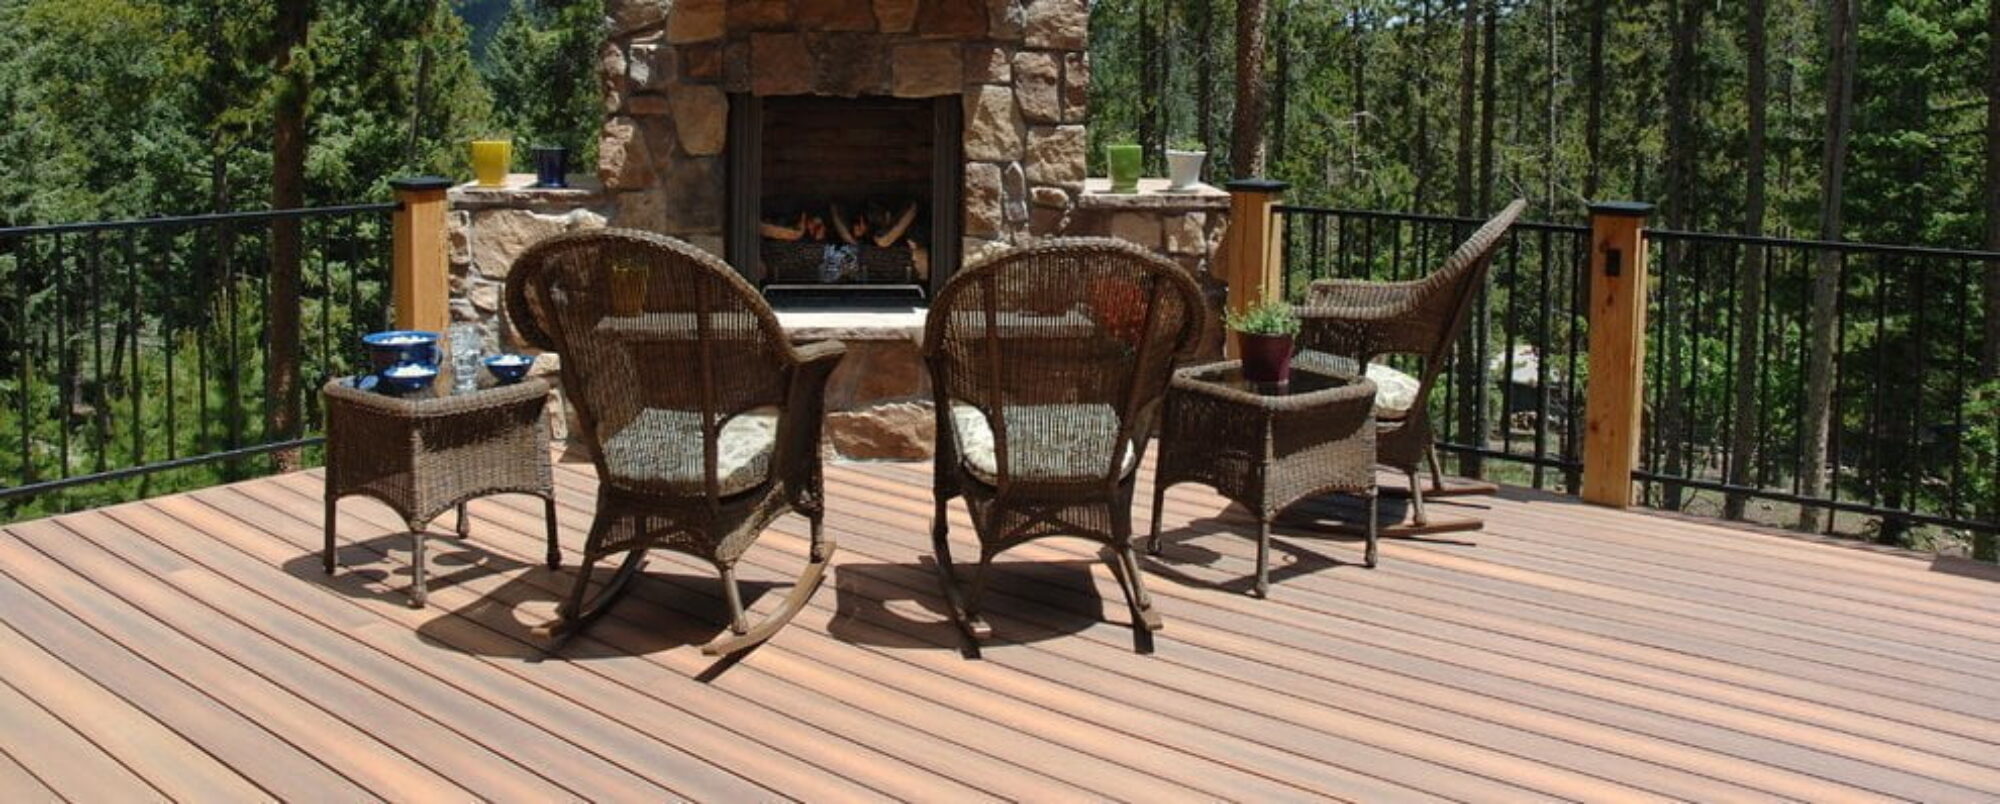 Spend More Time on Your Deck This Summer